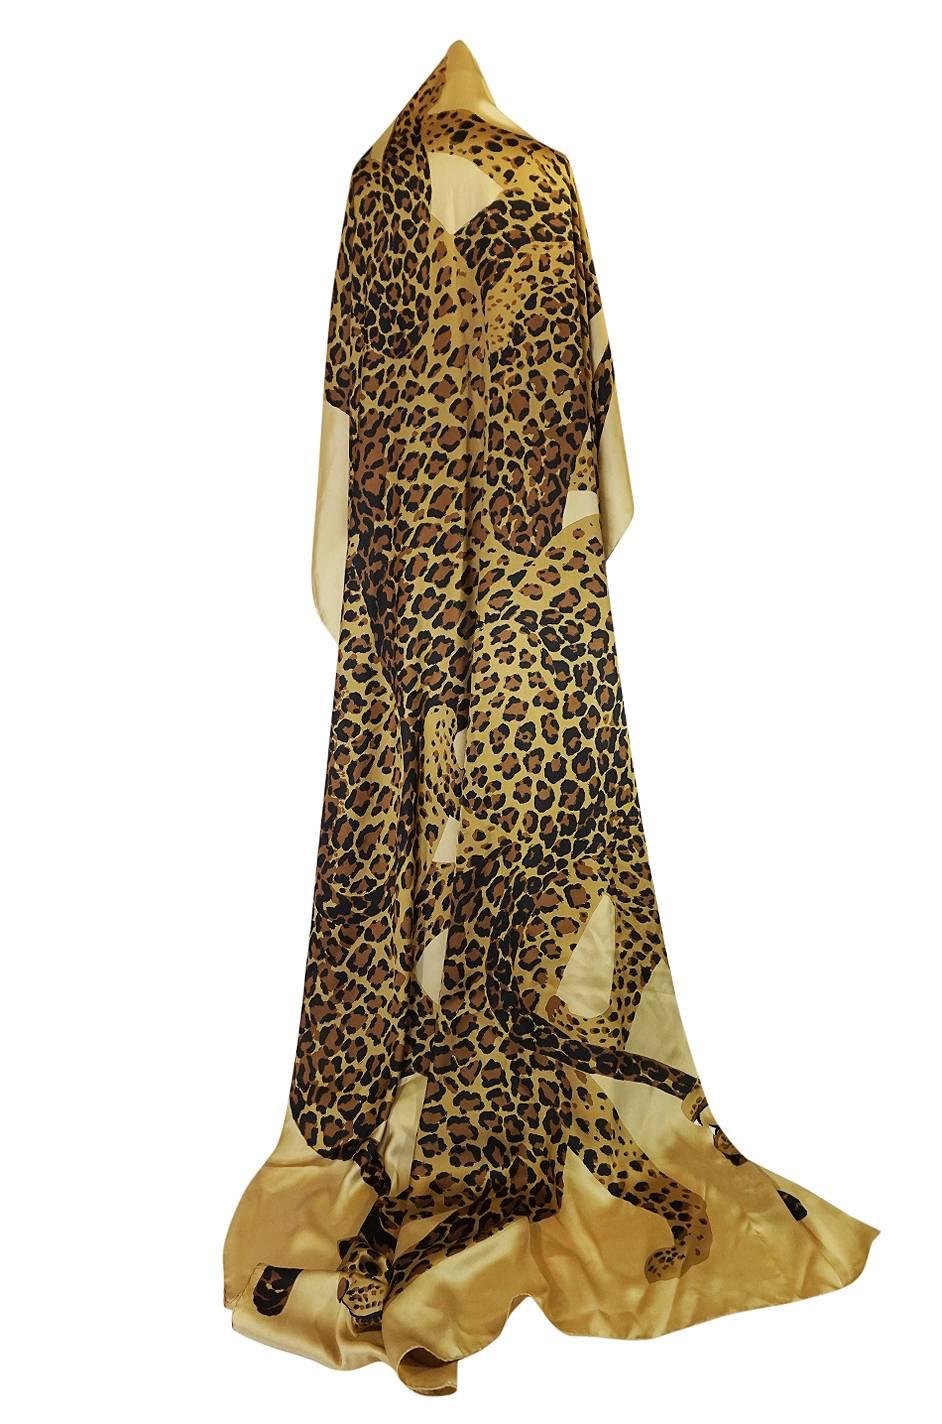 

This is one of the most unusual scarves or shawls that I have ever seen from Yves Saint Laurent and certainly the largest one I have ever seen. It is from the 1986 collection and depicts the leopards that he used extensively throughout that